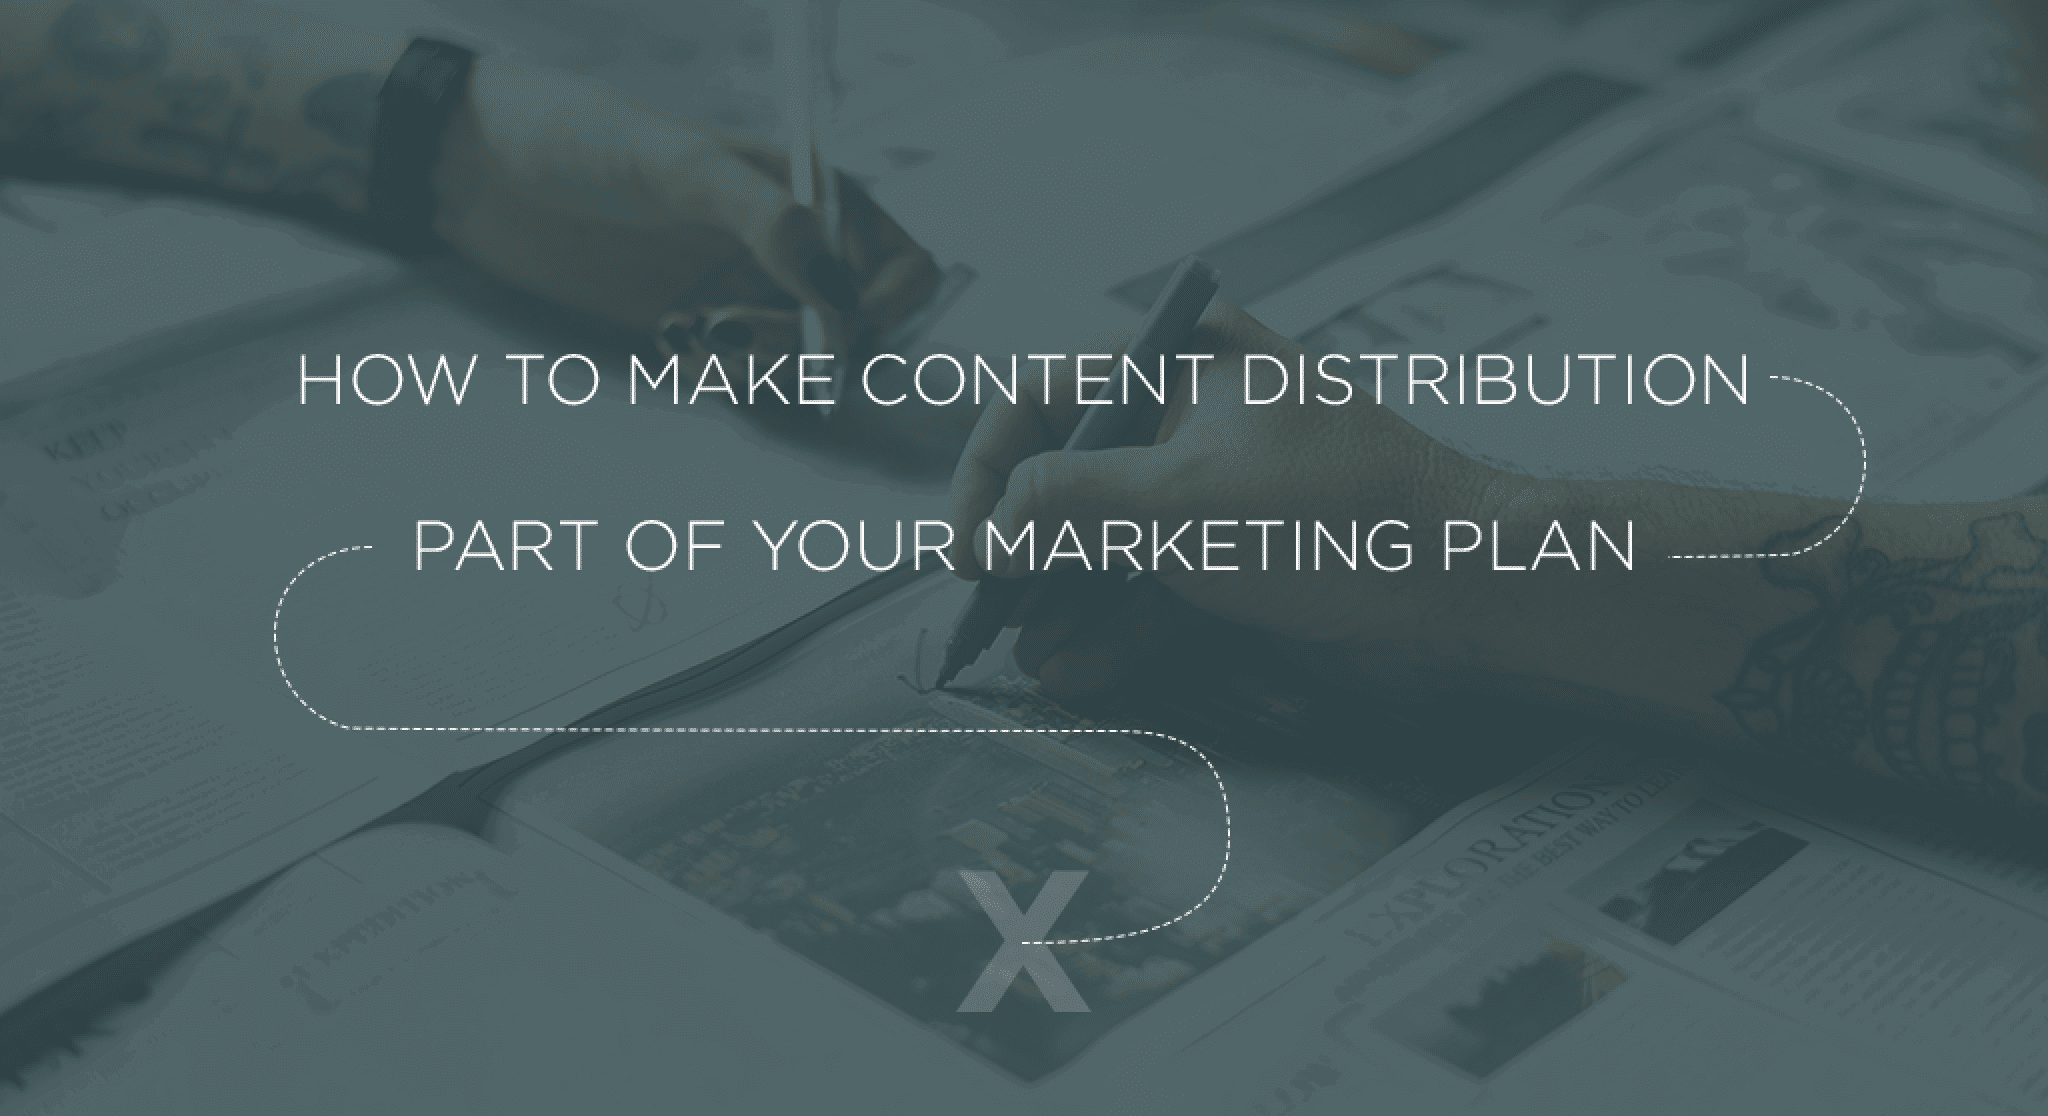 How to Make Content Distribution Part of Your Marketing Plan